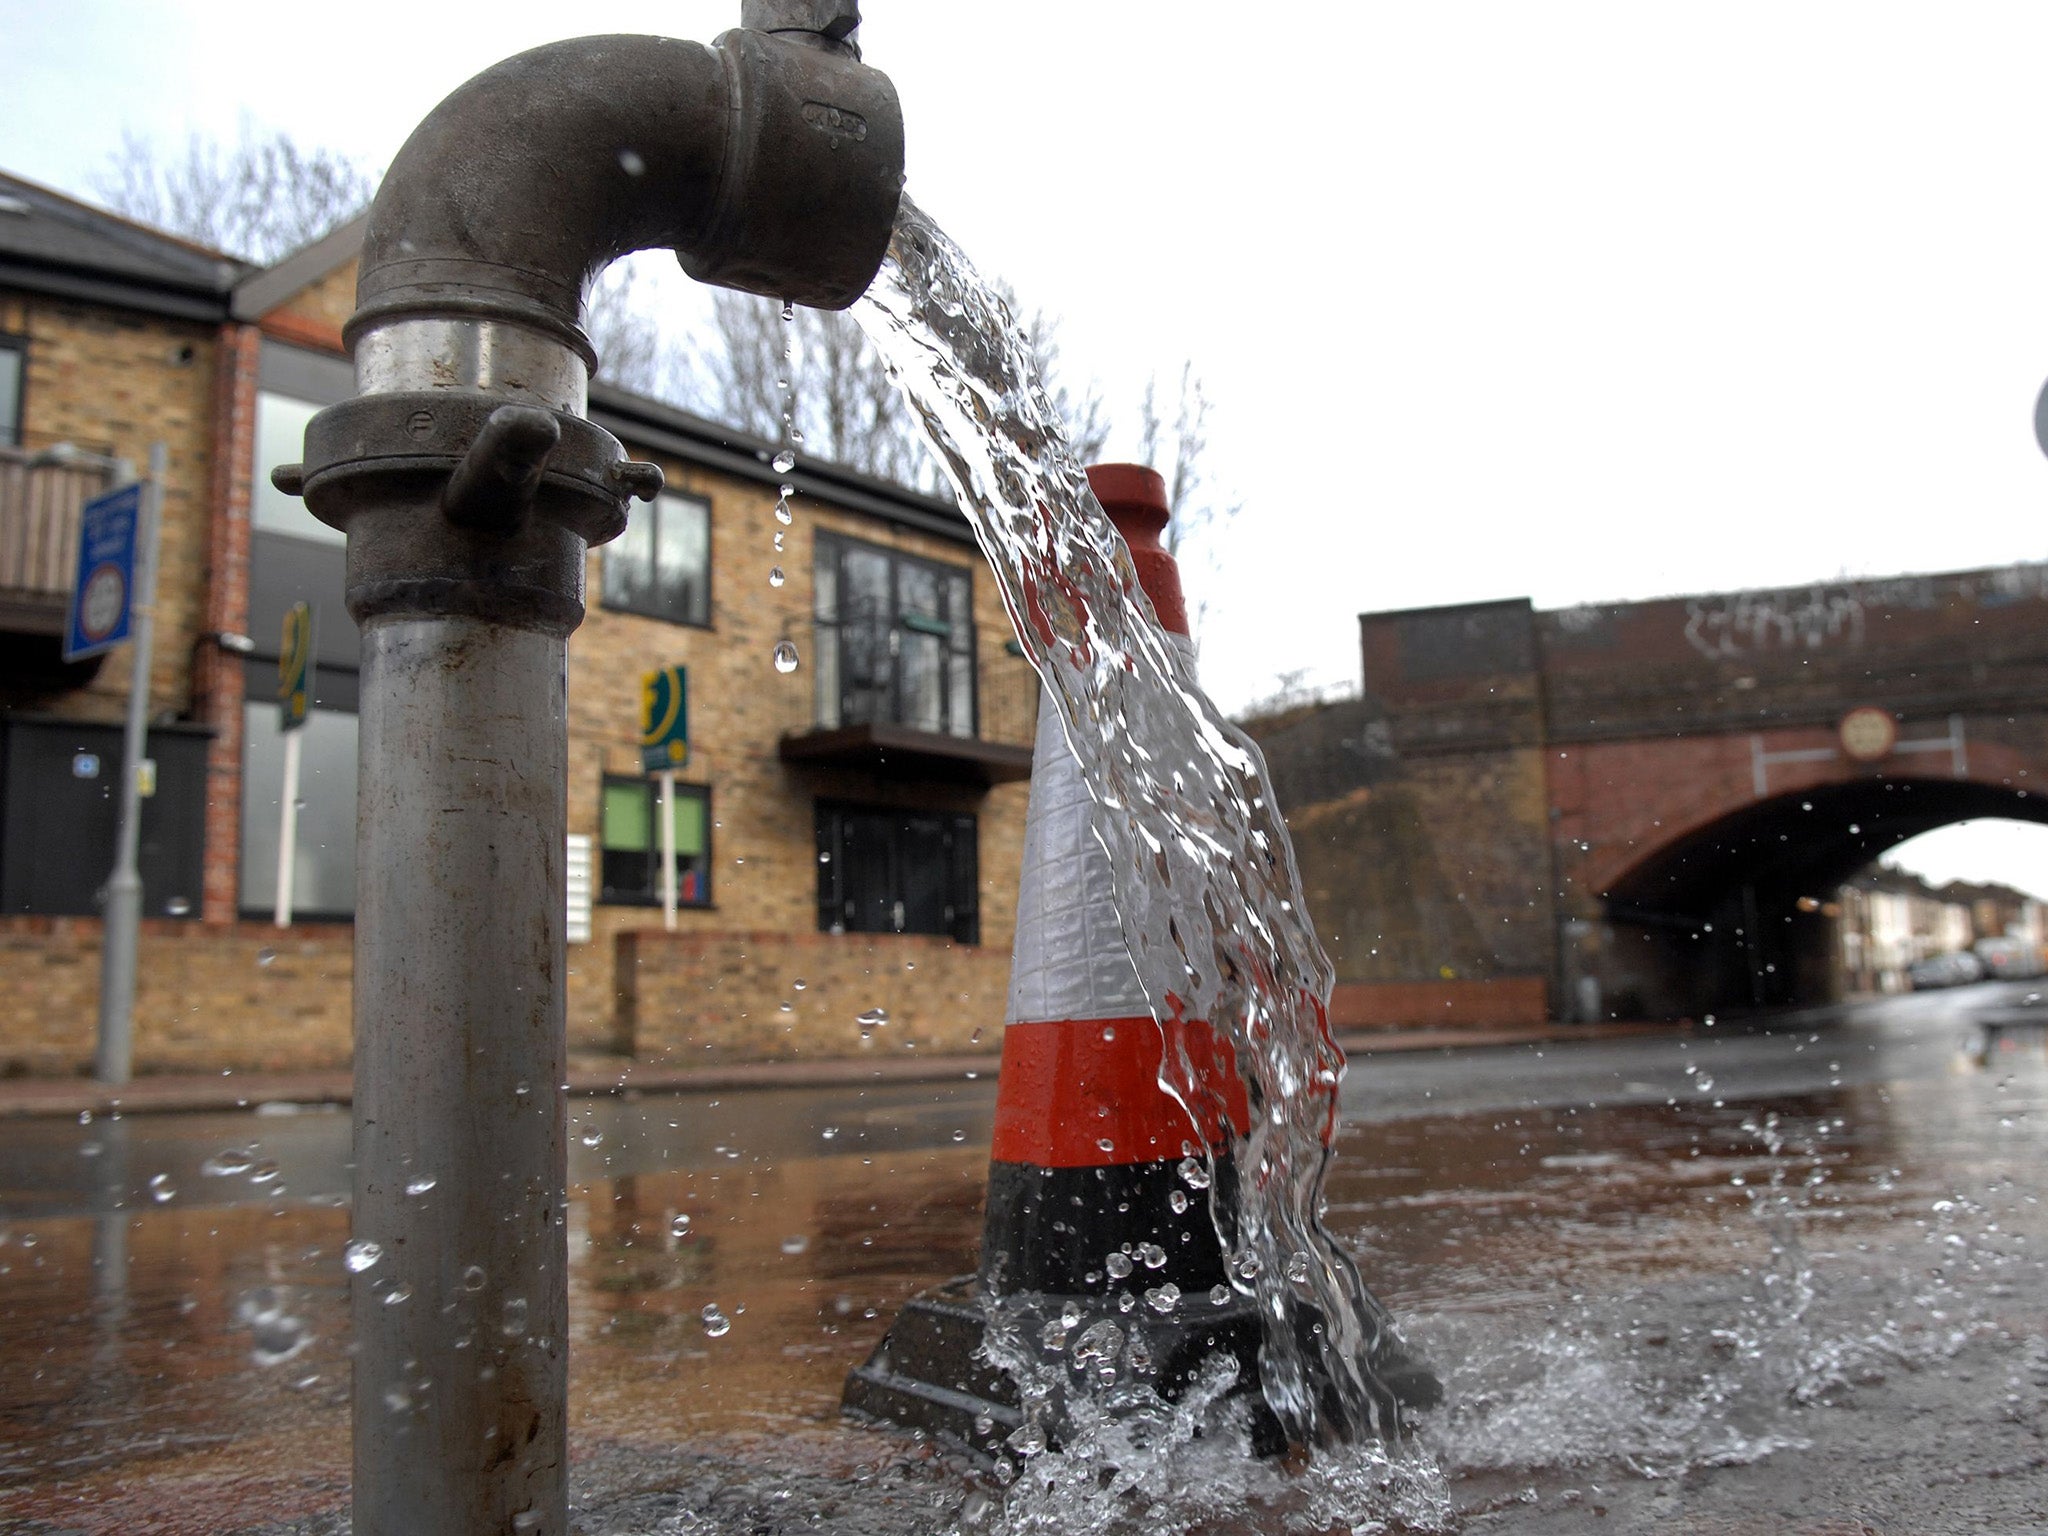 Water flows from a Thames Water standpipe after workers repaired a nearby damaged pipe